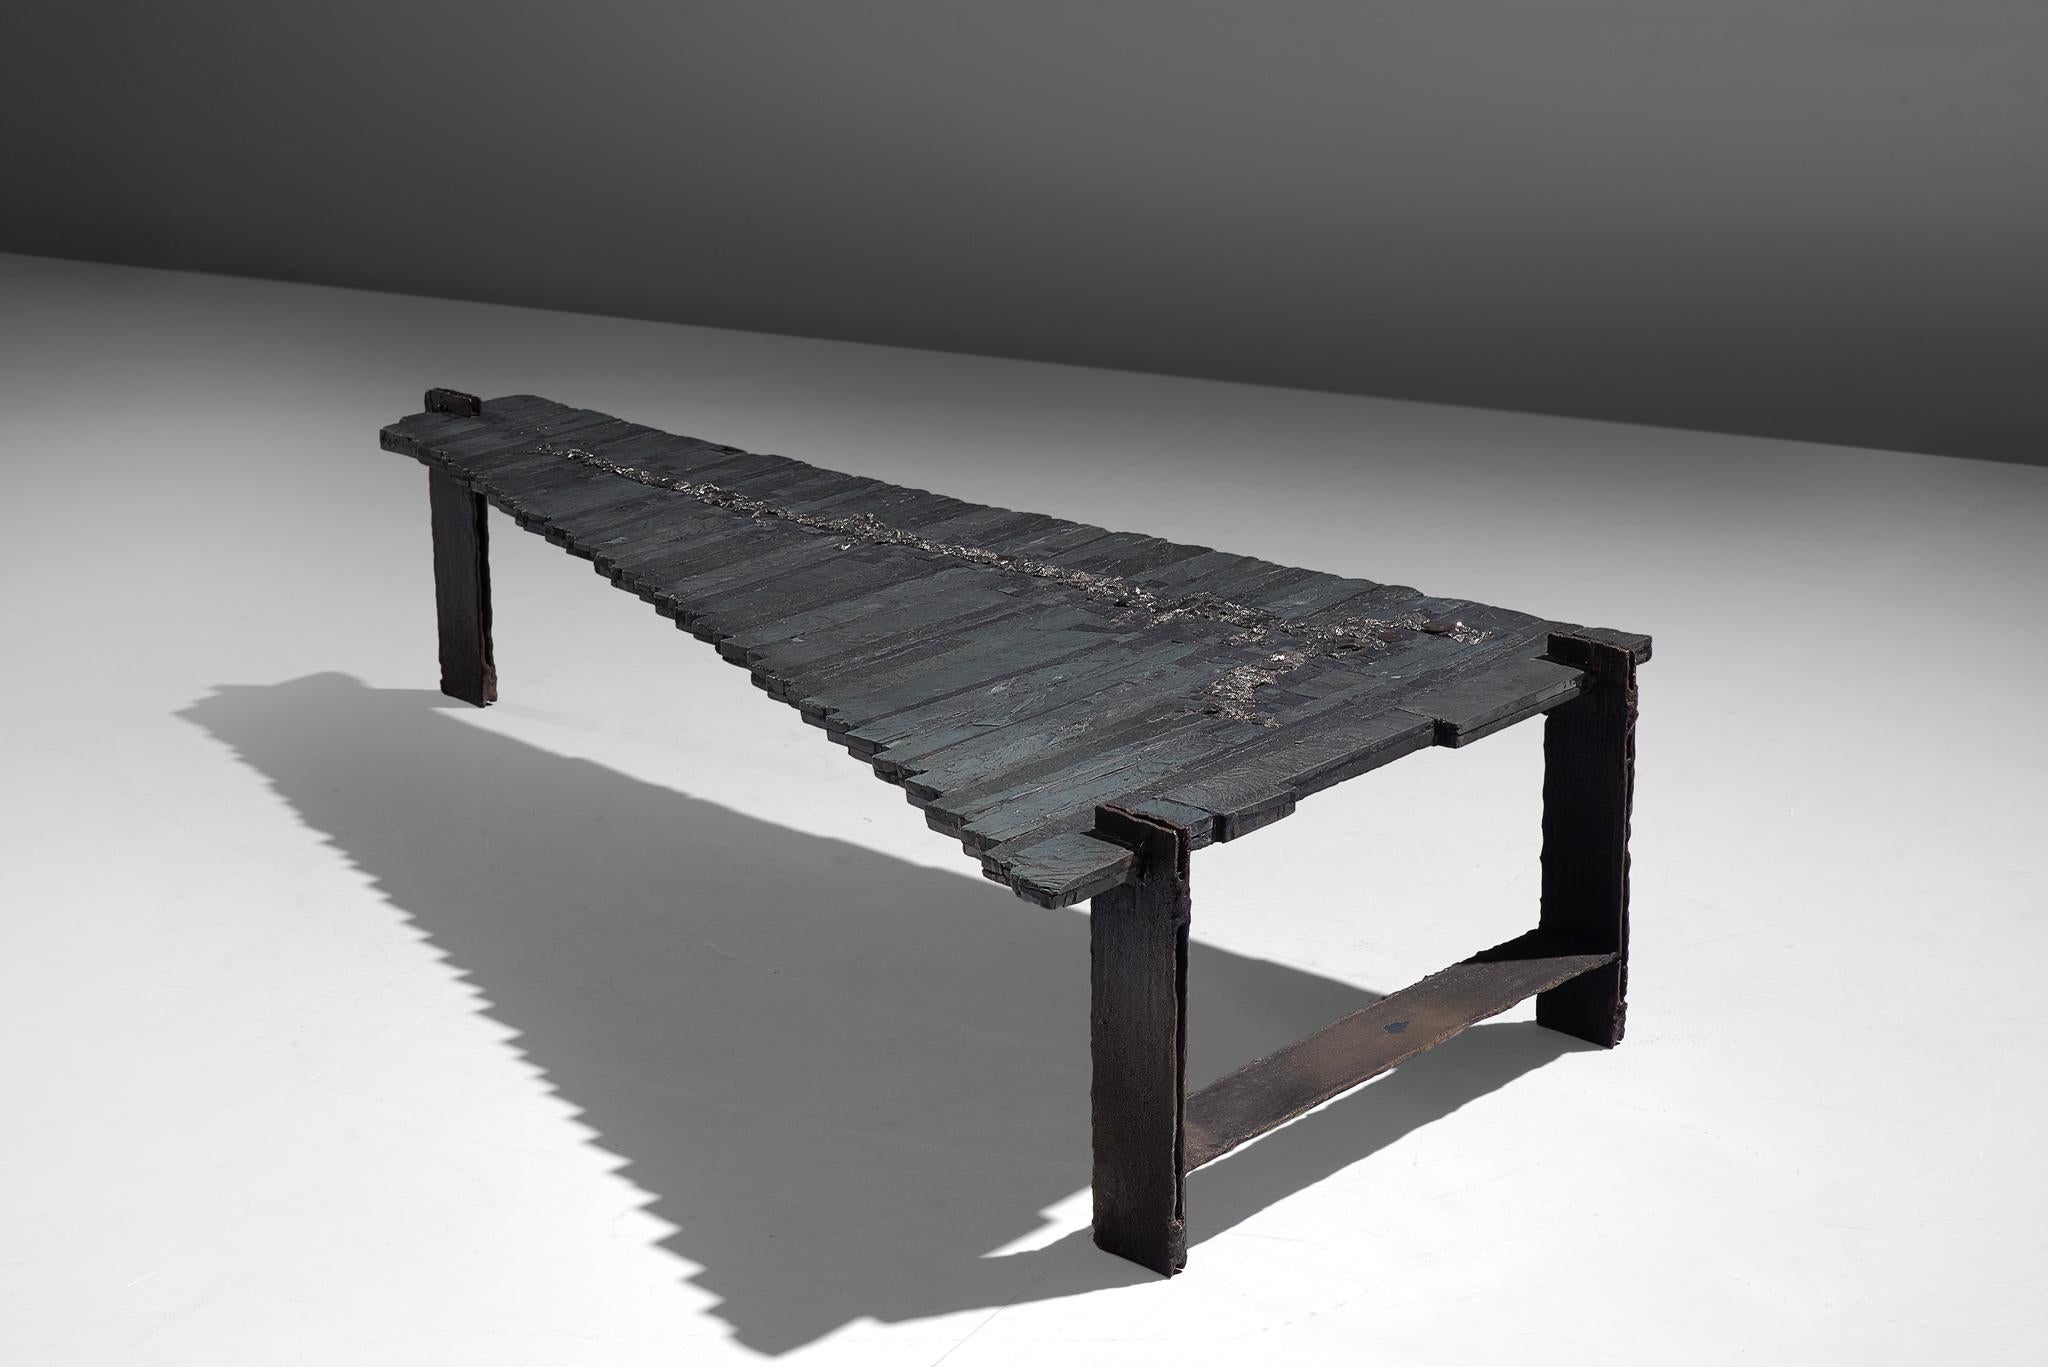 Pia Manu, coffee table, slate, iron and pyrite Belgium, 1970s.

One of a kind brutalist cocktail table by Pia Manu. The table top consists of long piece of slate of differnet lengths, positioned in a row. The top is inlayed with an abstract